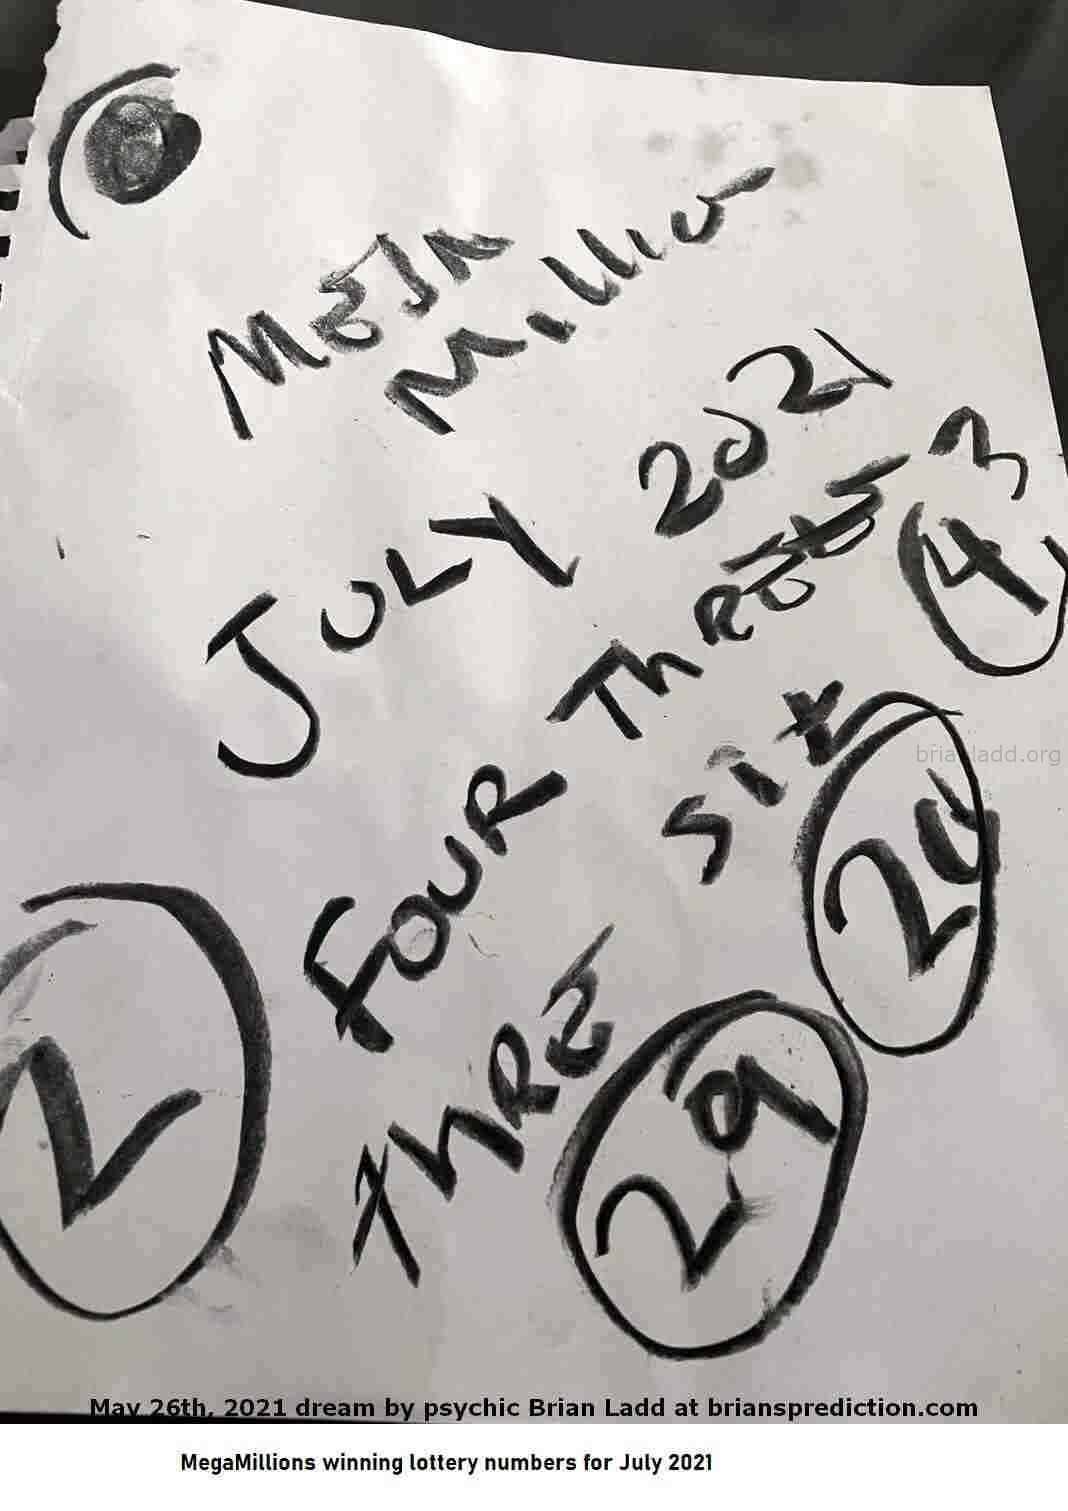 14932 26 May 2021 8 - MegaMillions winning lottery numbers for July 2021 .Want me to pick winning numbers for you? vis...
MegaMillions winning lottery numbers for July 2021 .Want me to pick winning numbers for you? visit  https://briansprediction.com/private-lottery.php  ( NEW!  Free lottery picks by mail, I will personally fill out your blank lottery sheet and mail it back to you for free, postage is included!  visit  https://briansprediction.com/picksbymail   )
